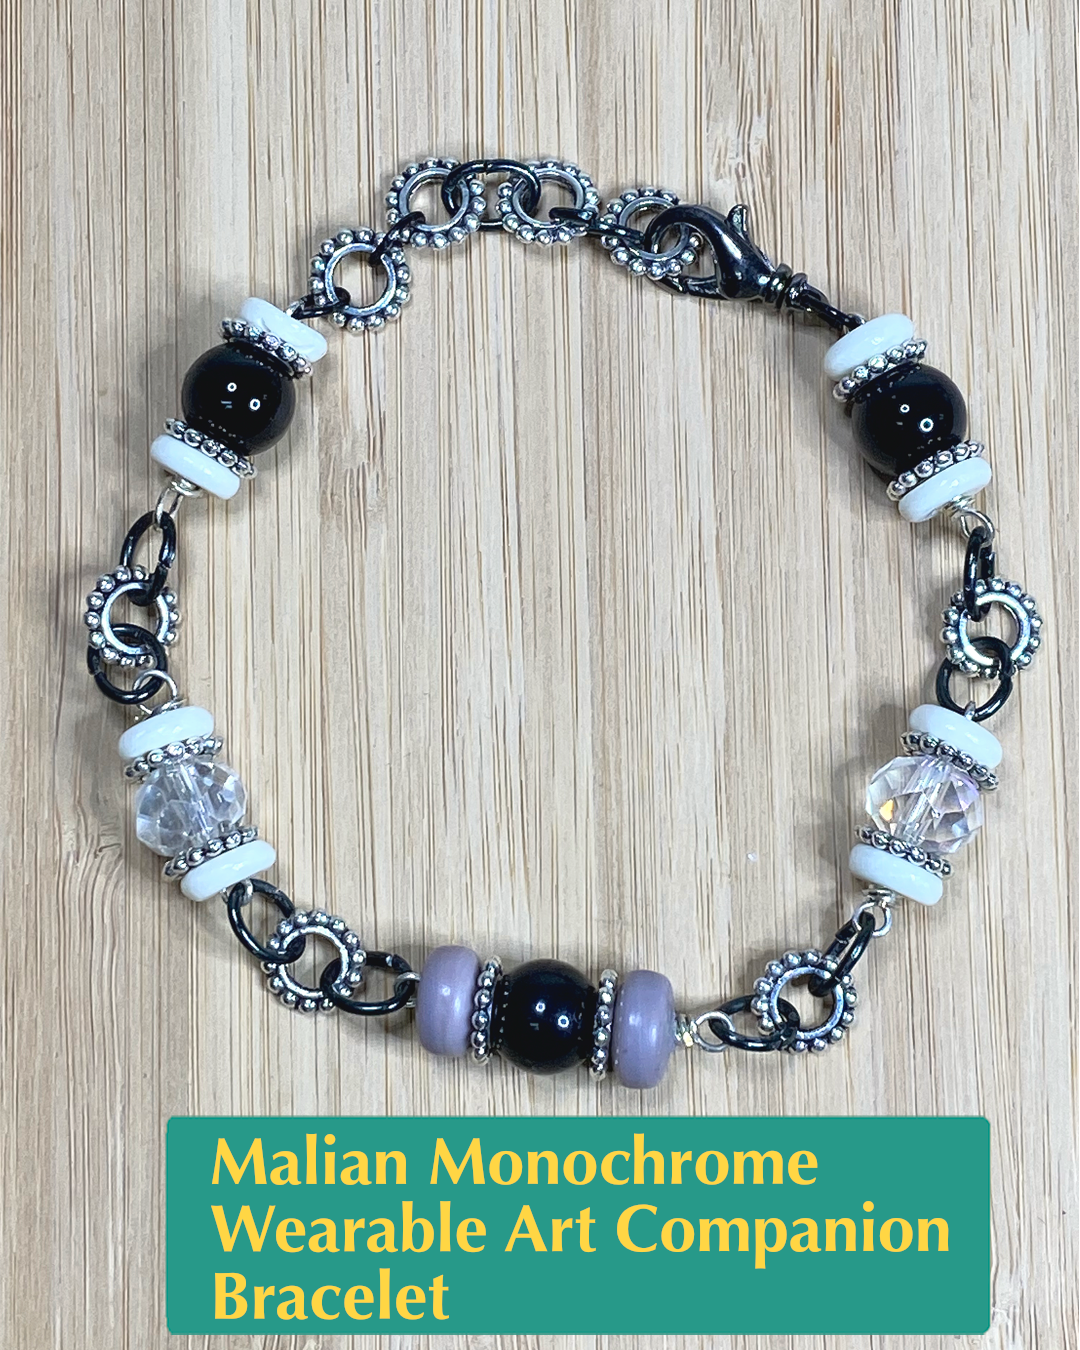 Handmade wearable art bracelet made from black onyx, white bone, clear and grey salvaged beads, and black and silver metals.